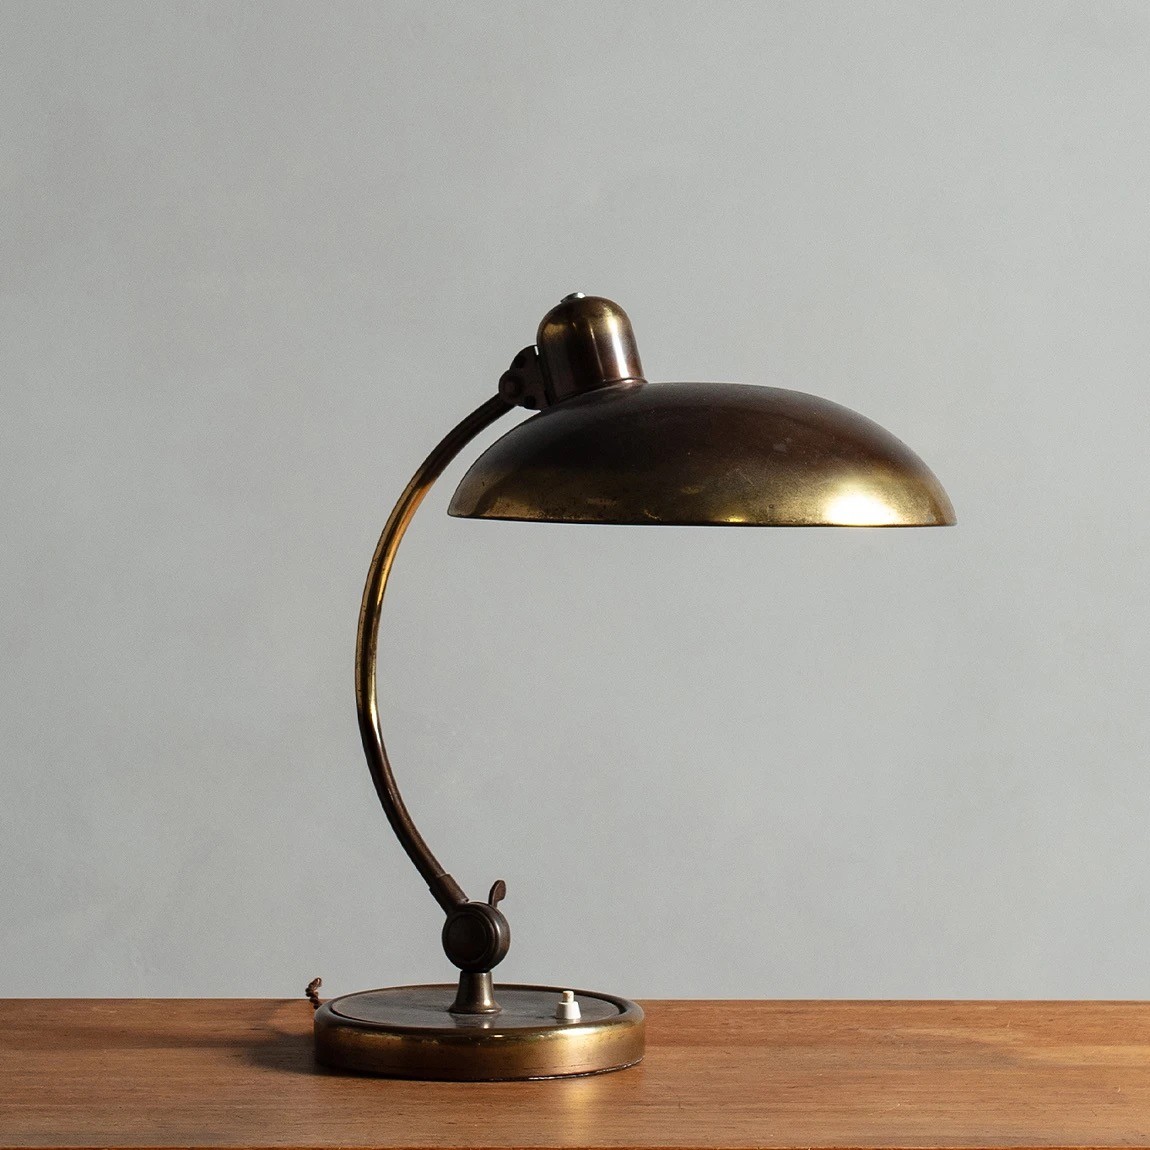 The image of an President' Table Lamp by Christian Dell product